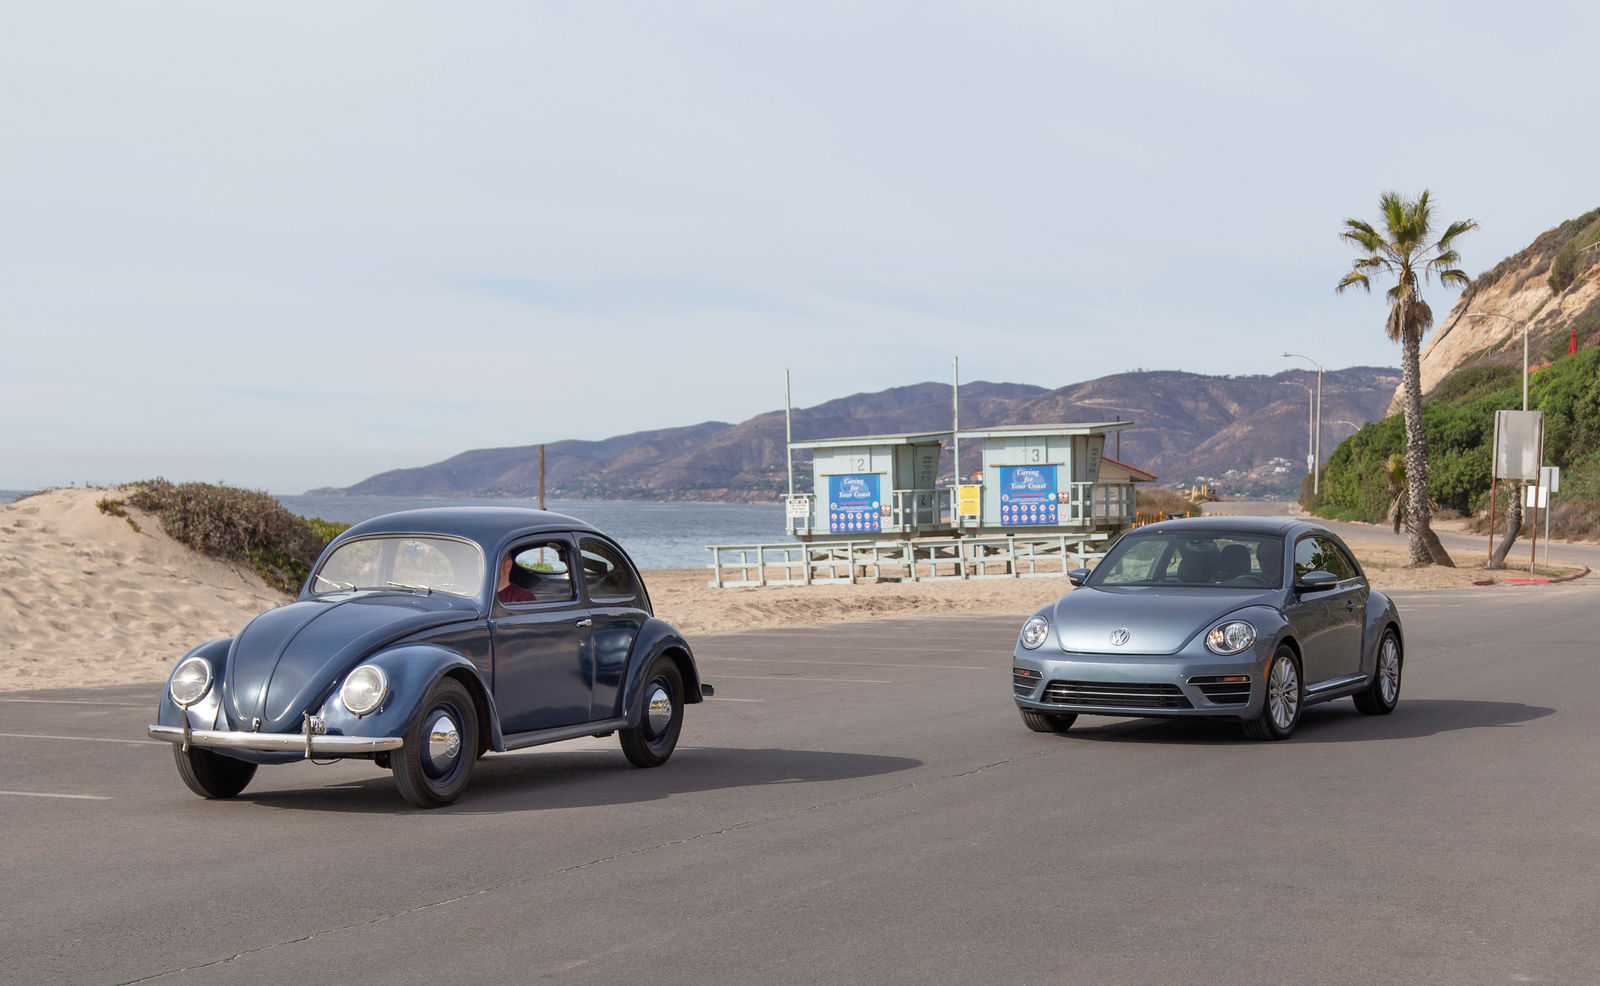 Historical Beetle and Volkswagen Beetle "Final Edition"